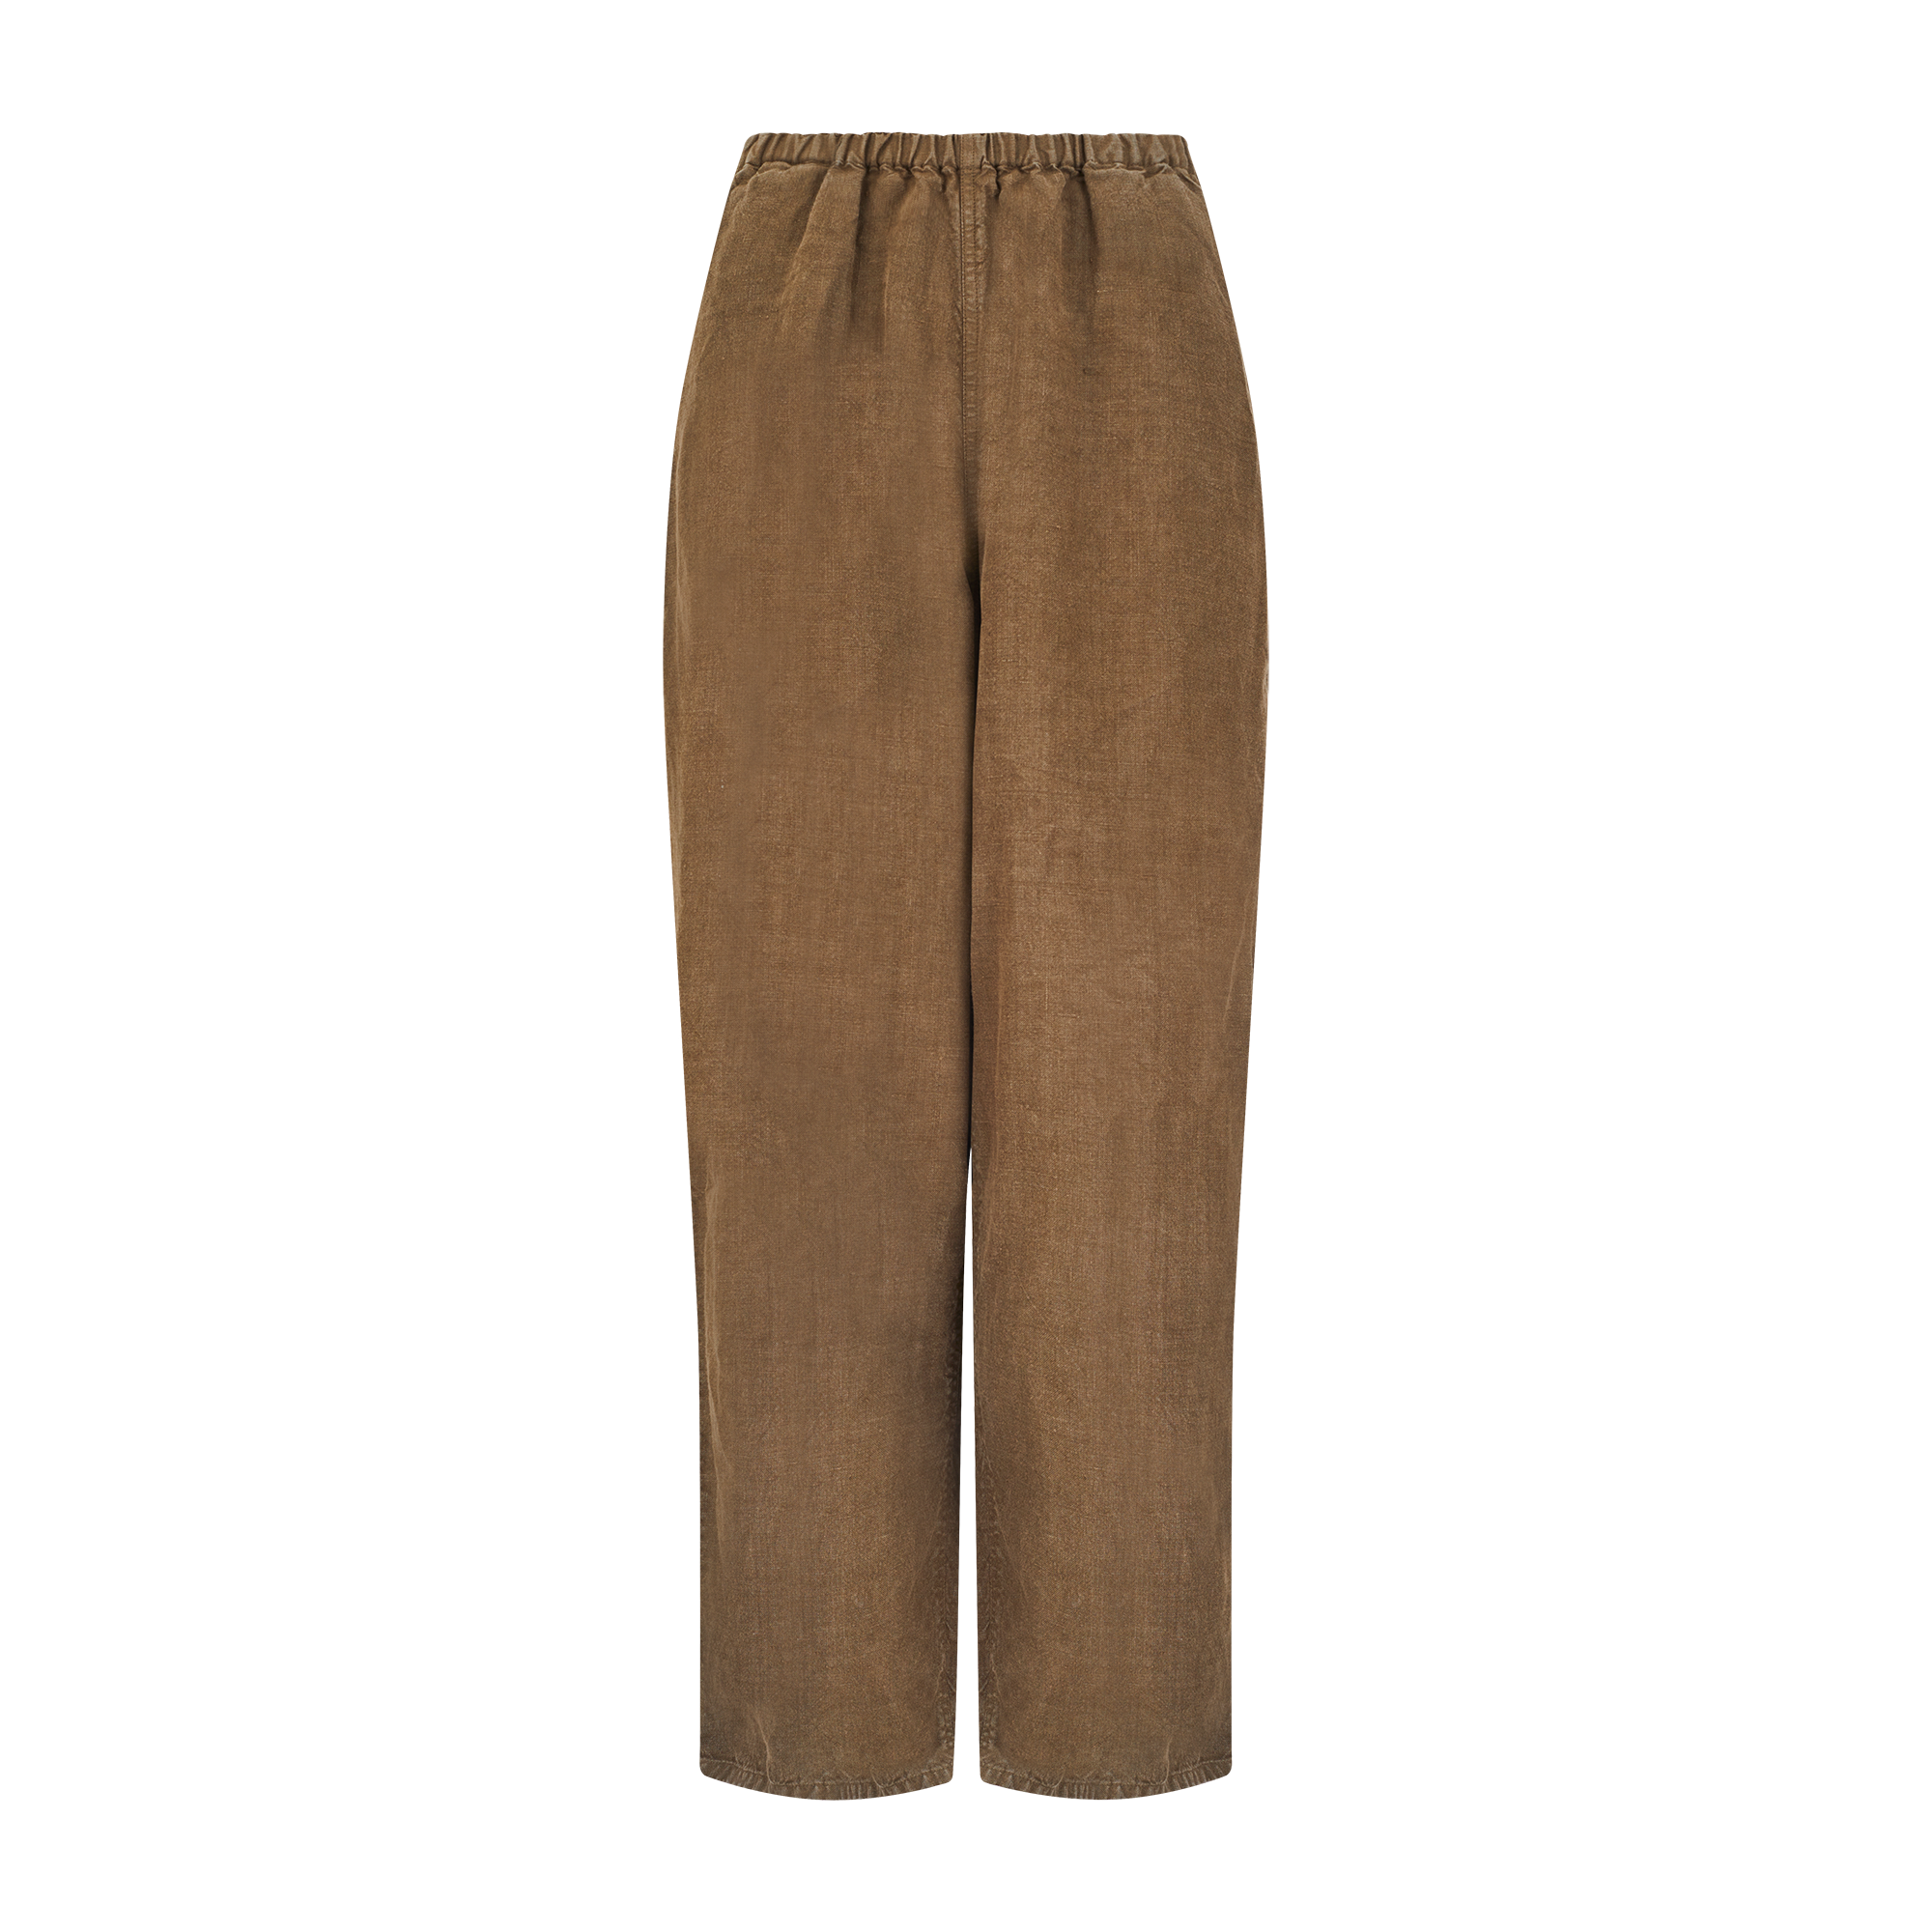 The Easy Trousers